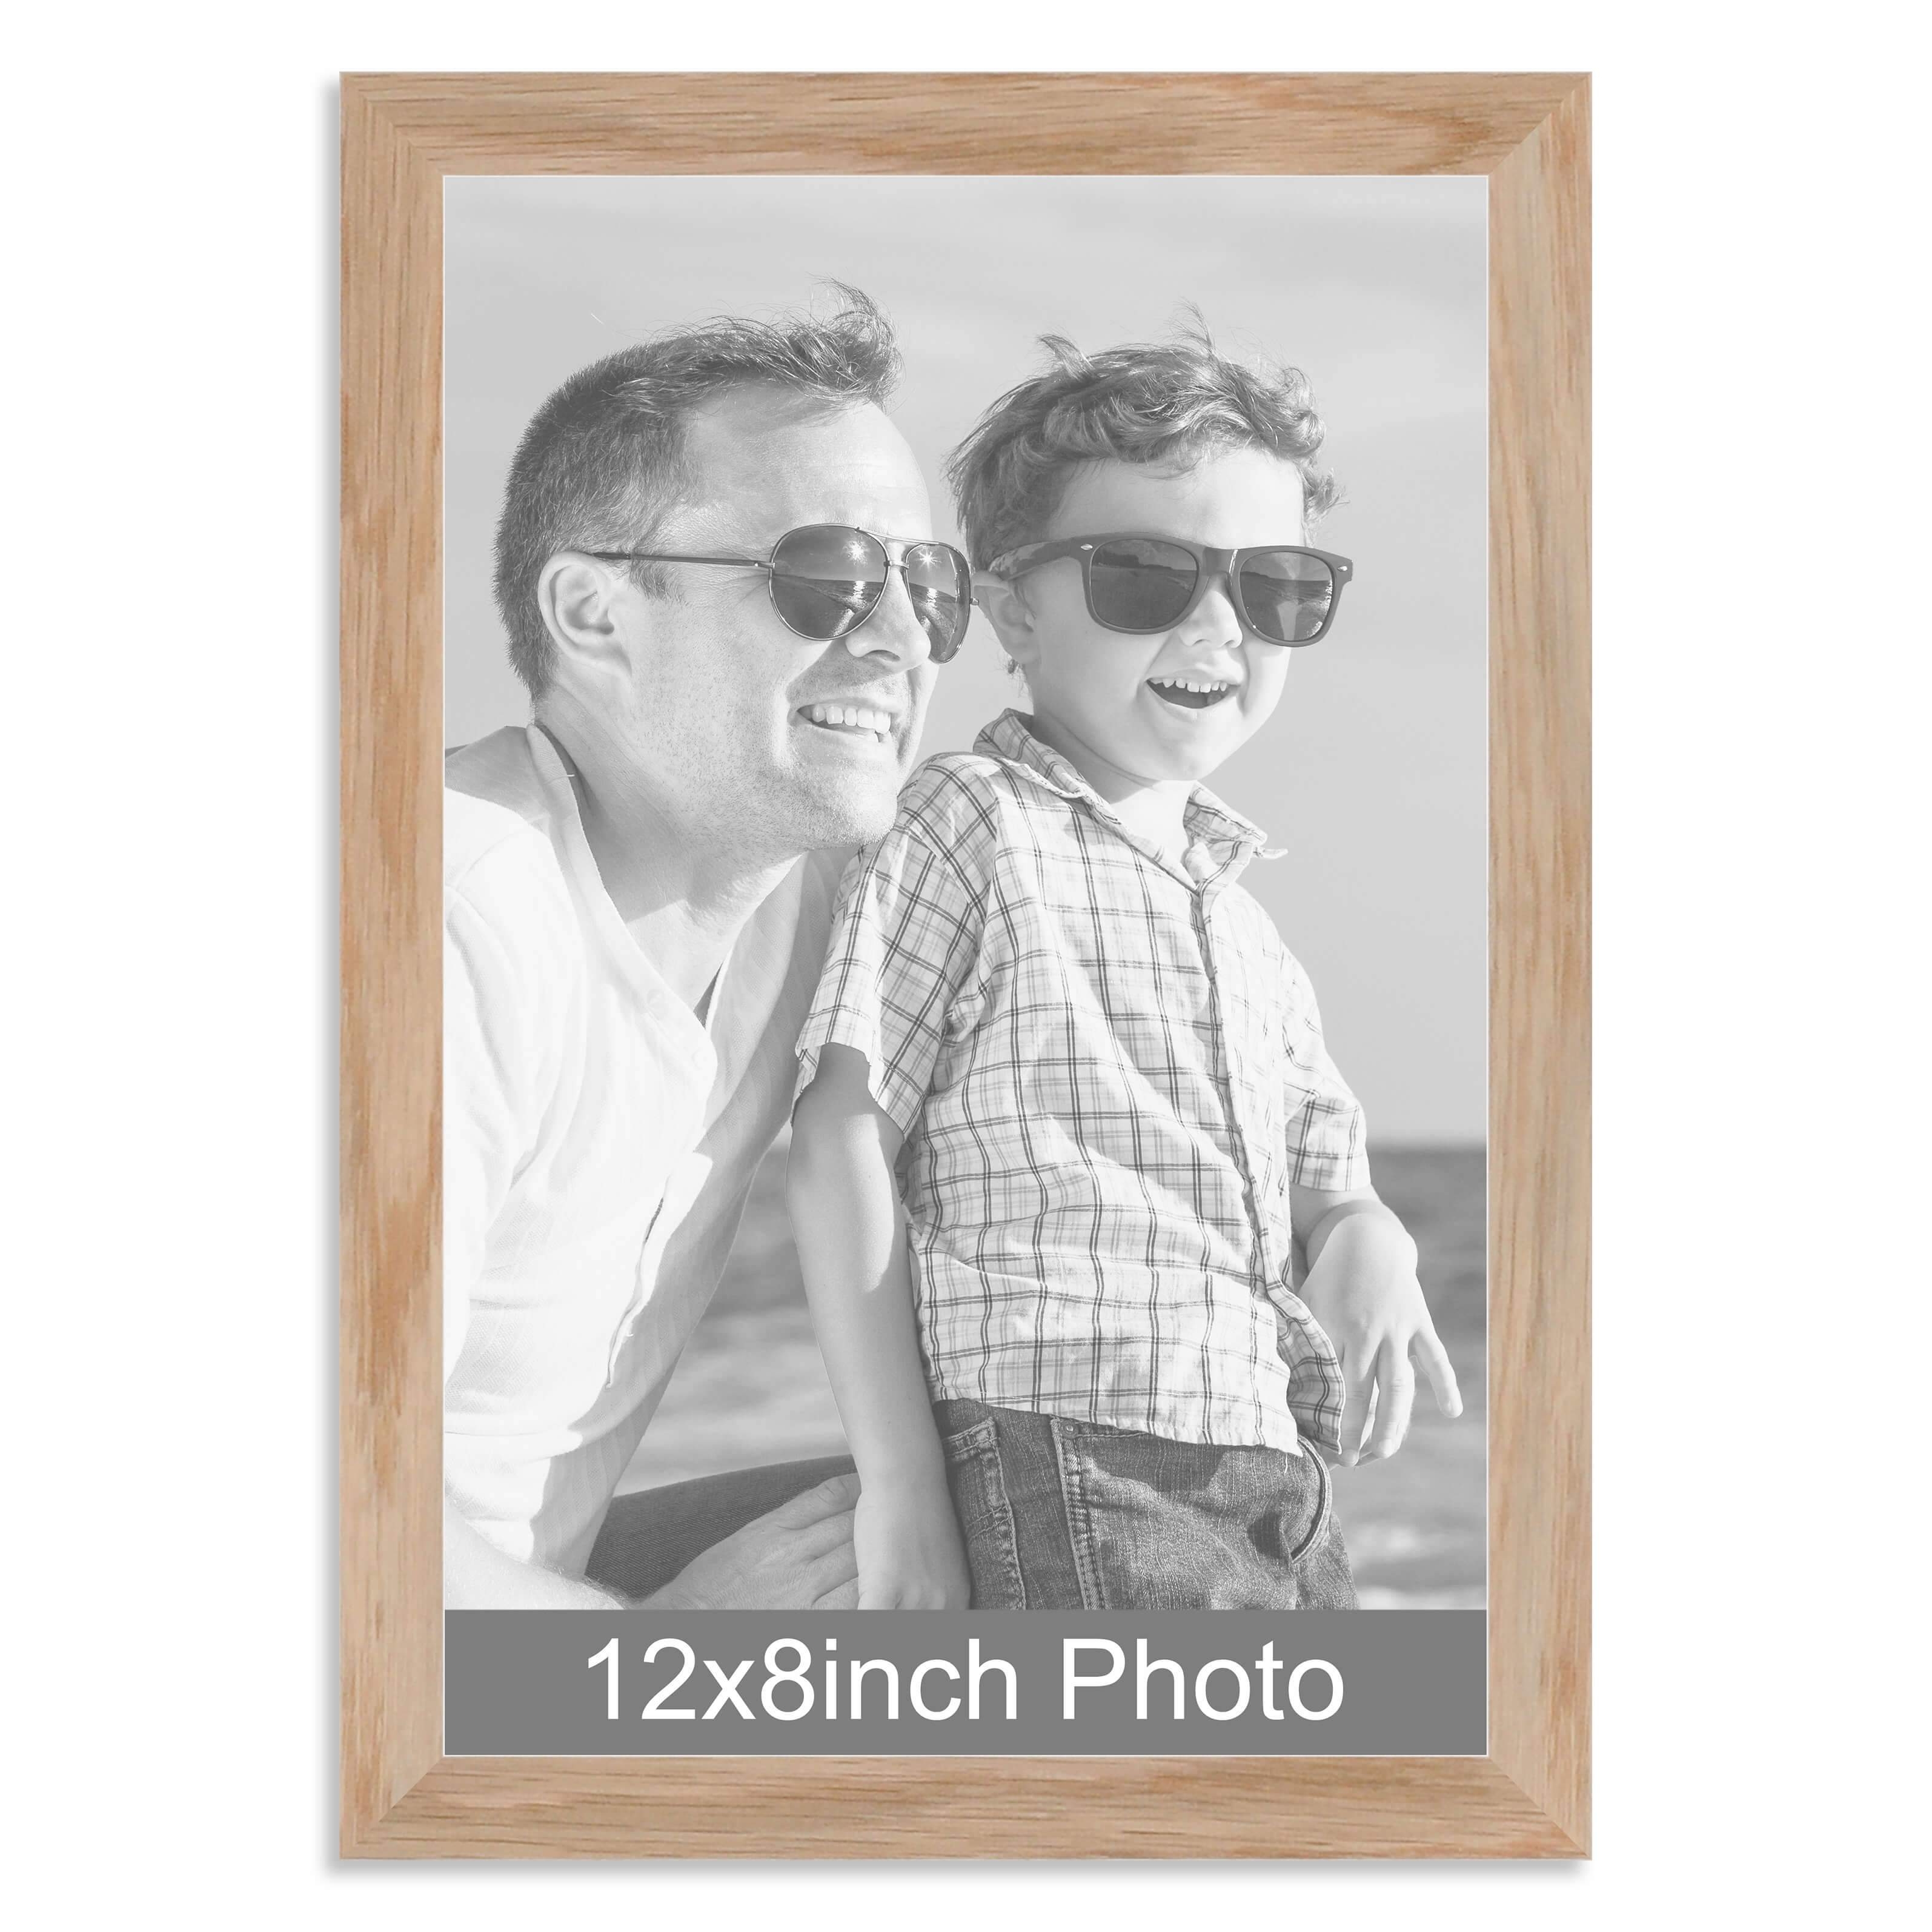 12 x 8inch Solid Oak Photo Frame for a 12×8/8x12in photo